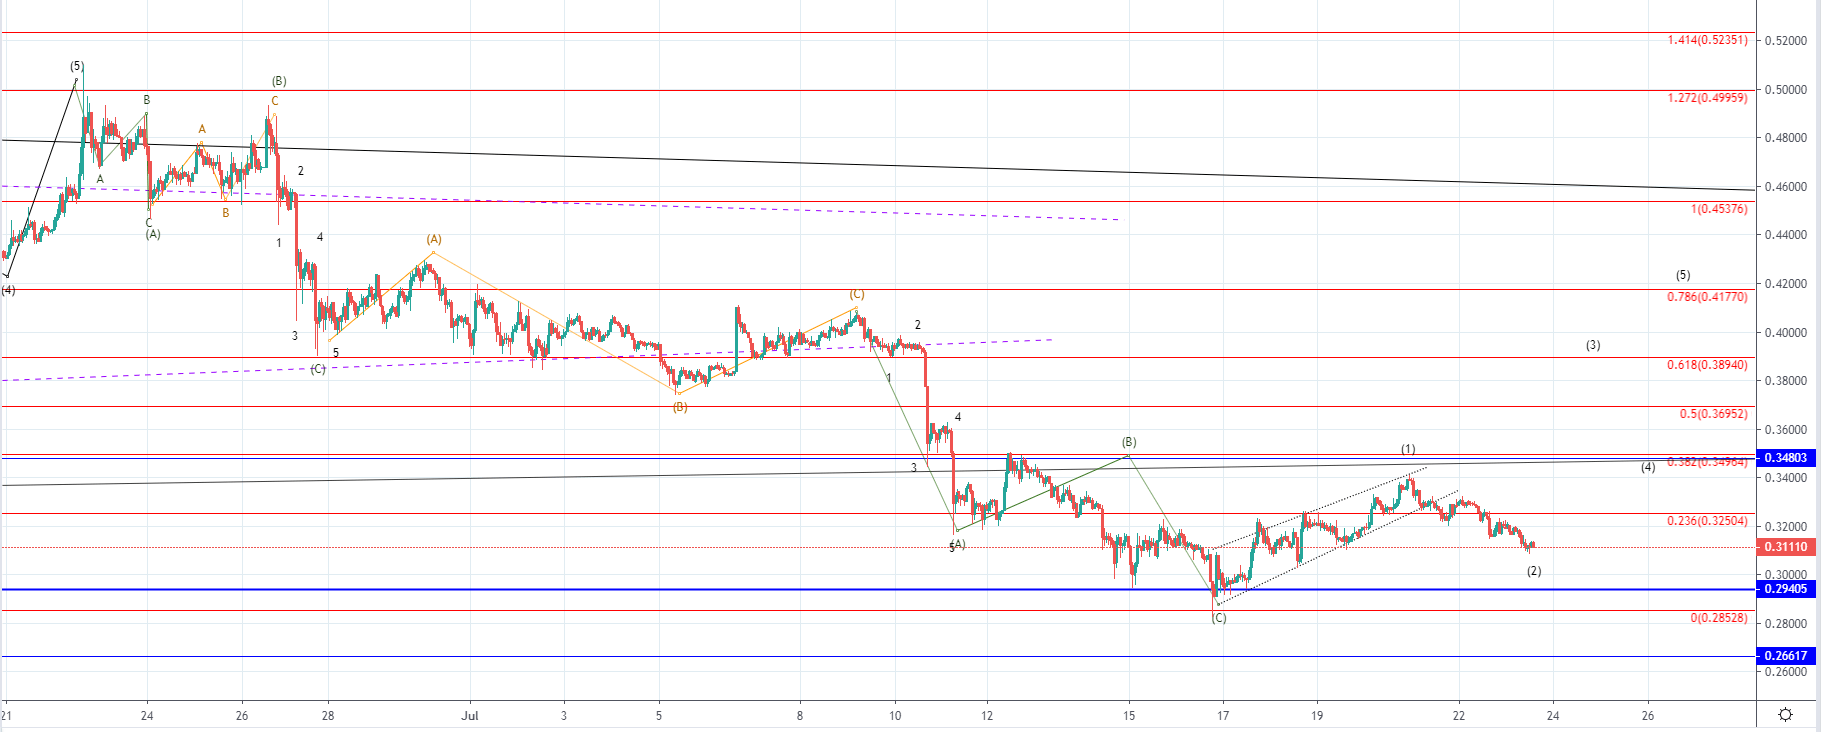 BTC and XRP - Retracement seen but recovery is expected to continue